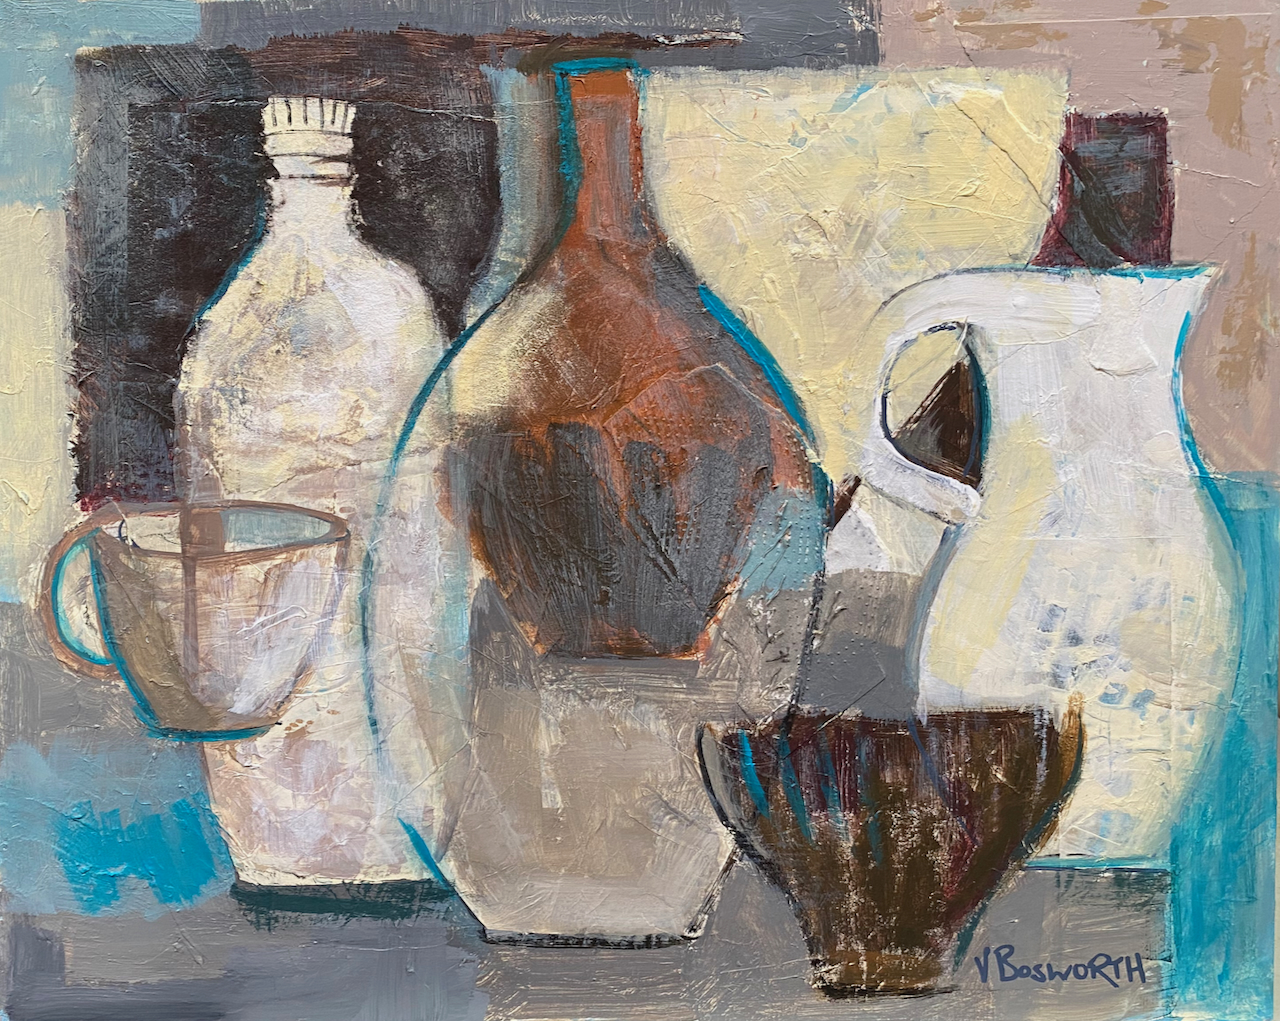 Still life with blue by Vicki Bosworth | Lethbridge 20000 2023 Finalists | Lethbridge Gallery